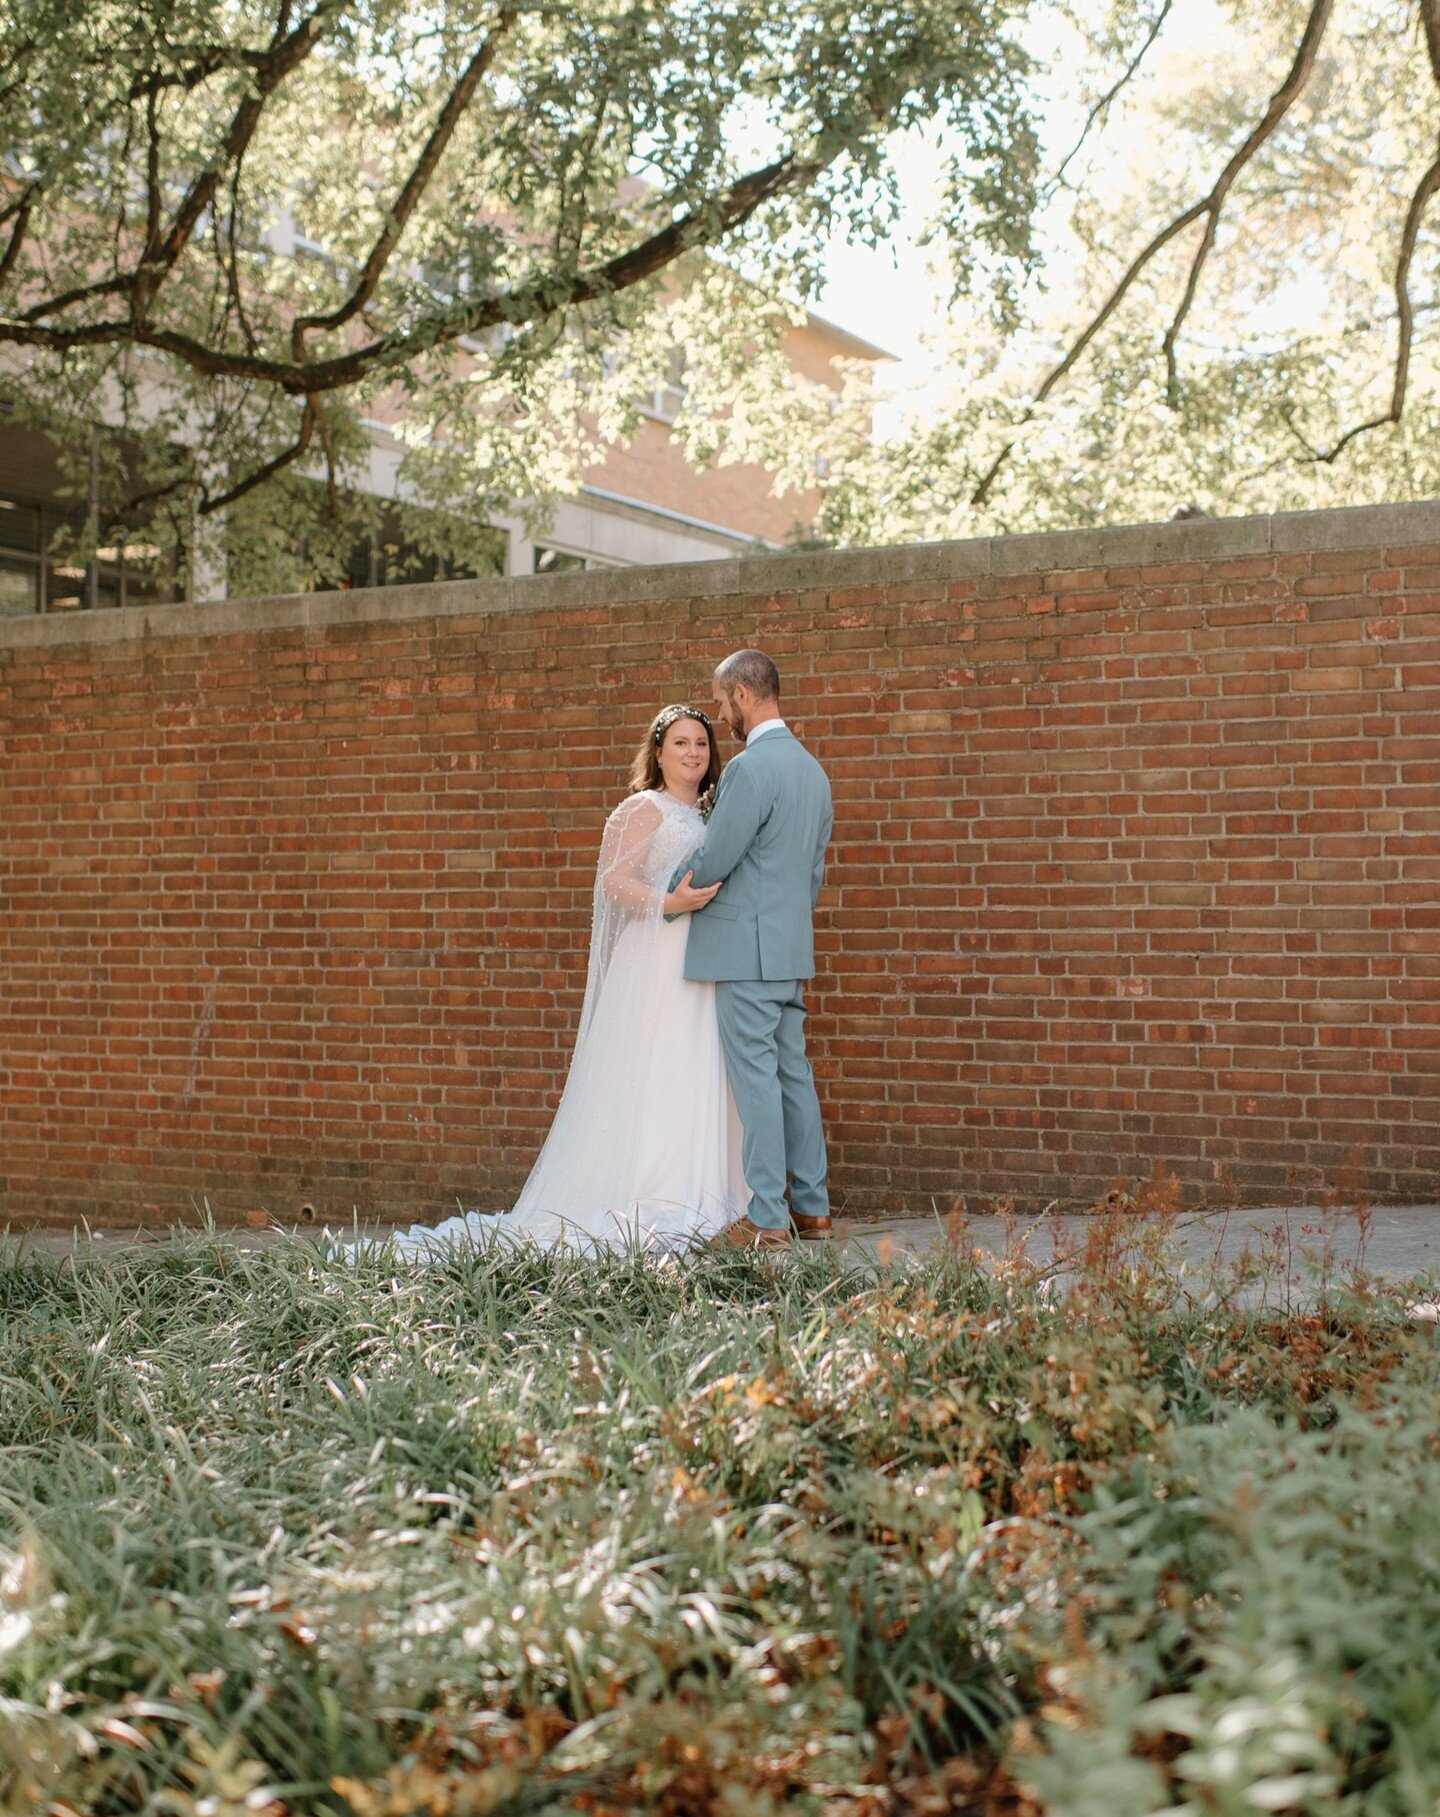 In the heart of the city, I had the privilege of capturing ✨Anthony and Hannah's✨ beautiful elopement. Their day kicked off in their cozy, plant-filled🌵 home - so much color and charm! Their backyard turned into a whimsical wonderland, with silver d